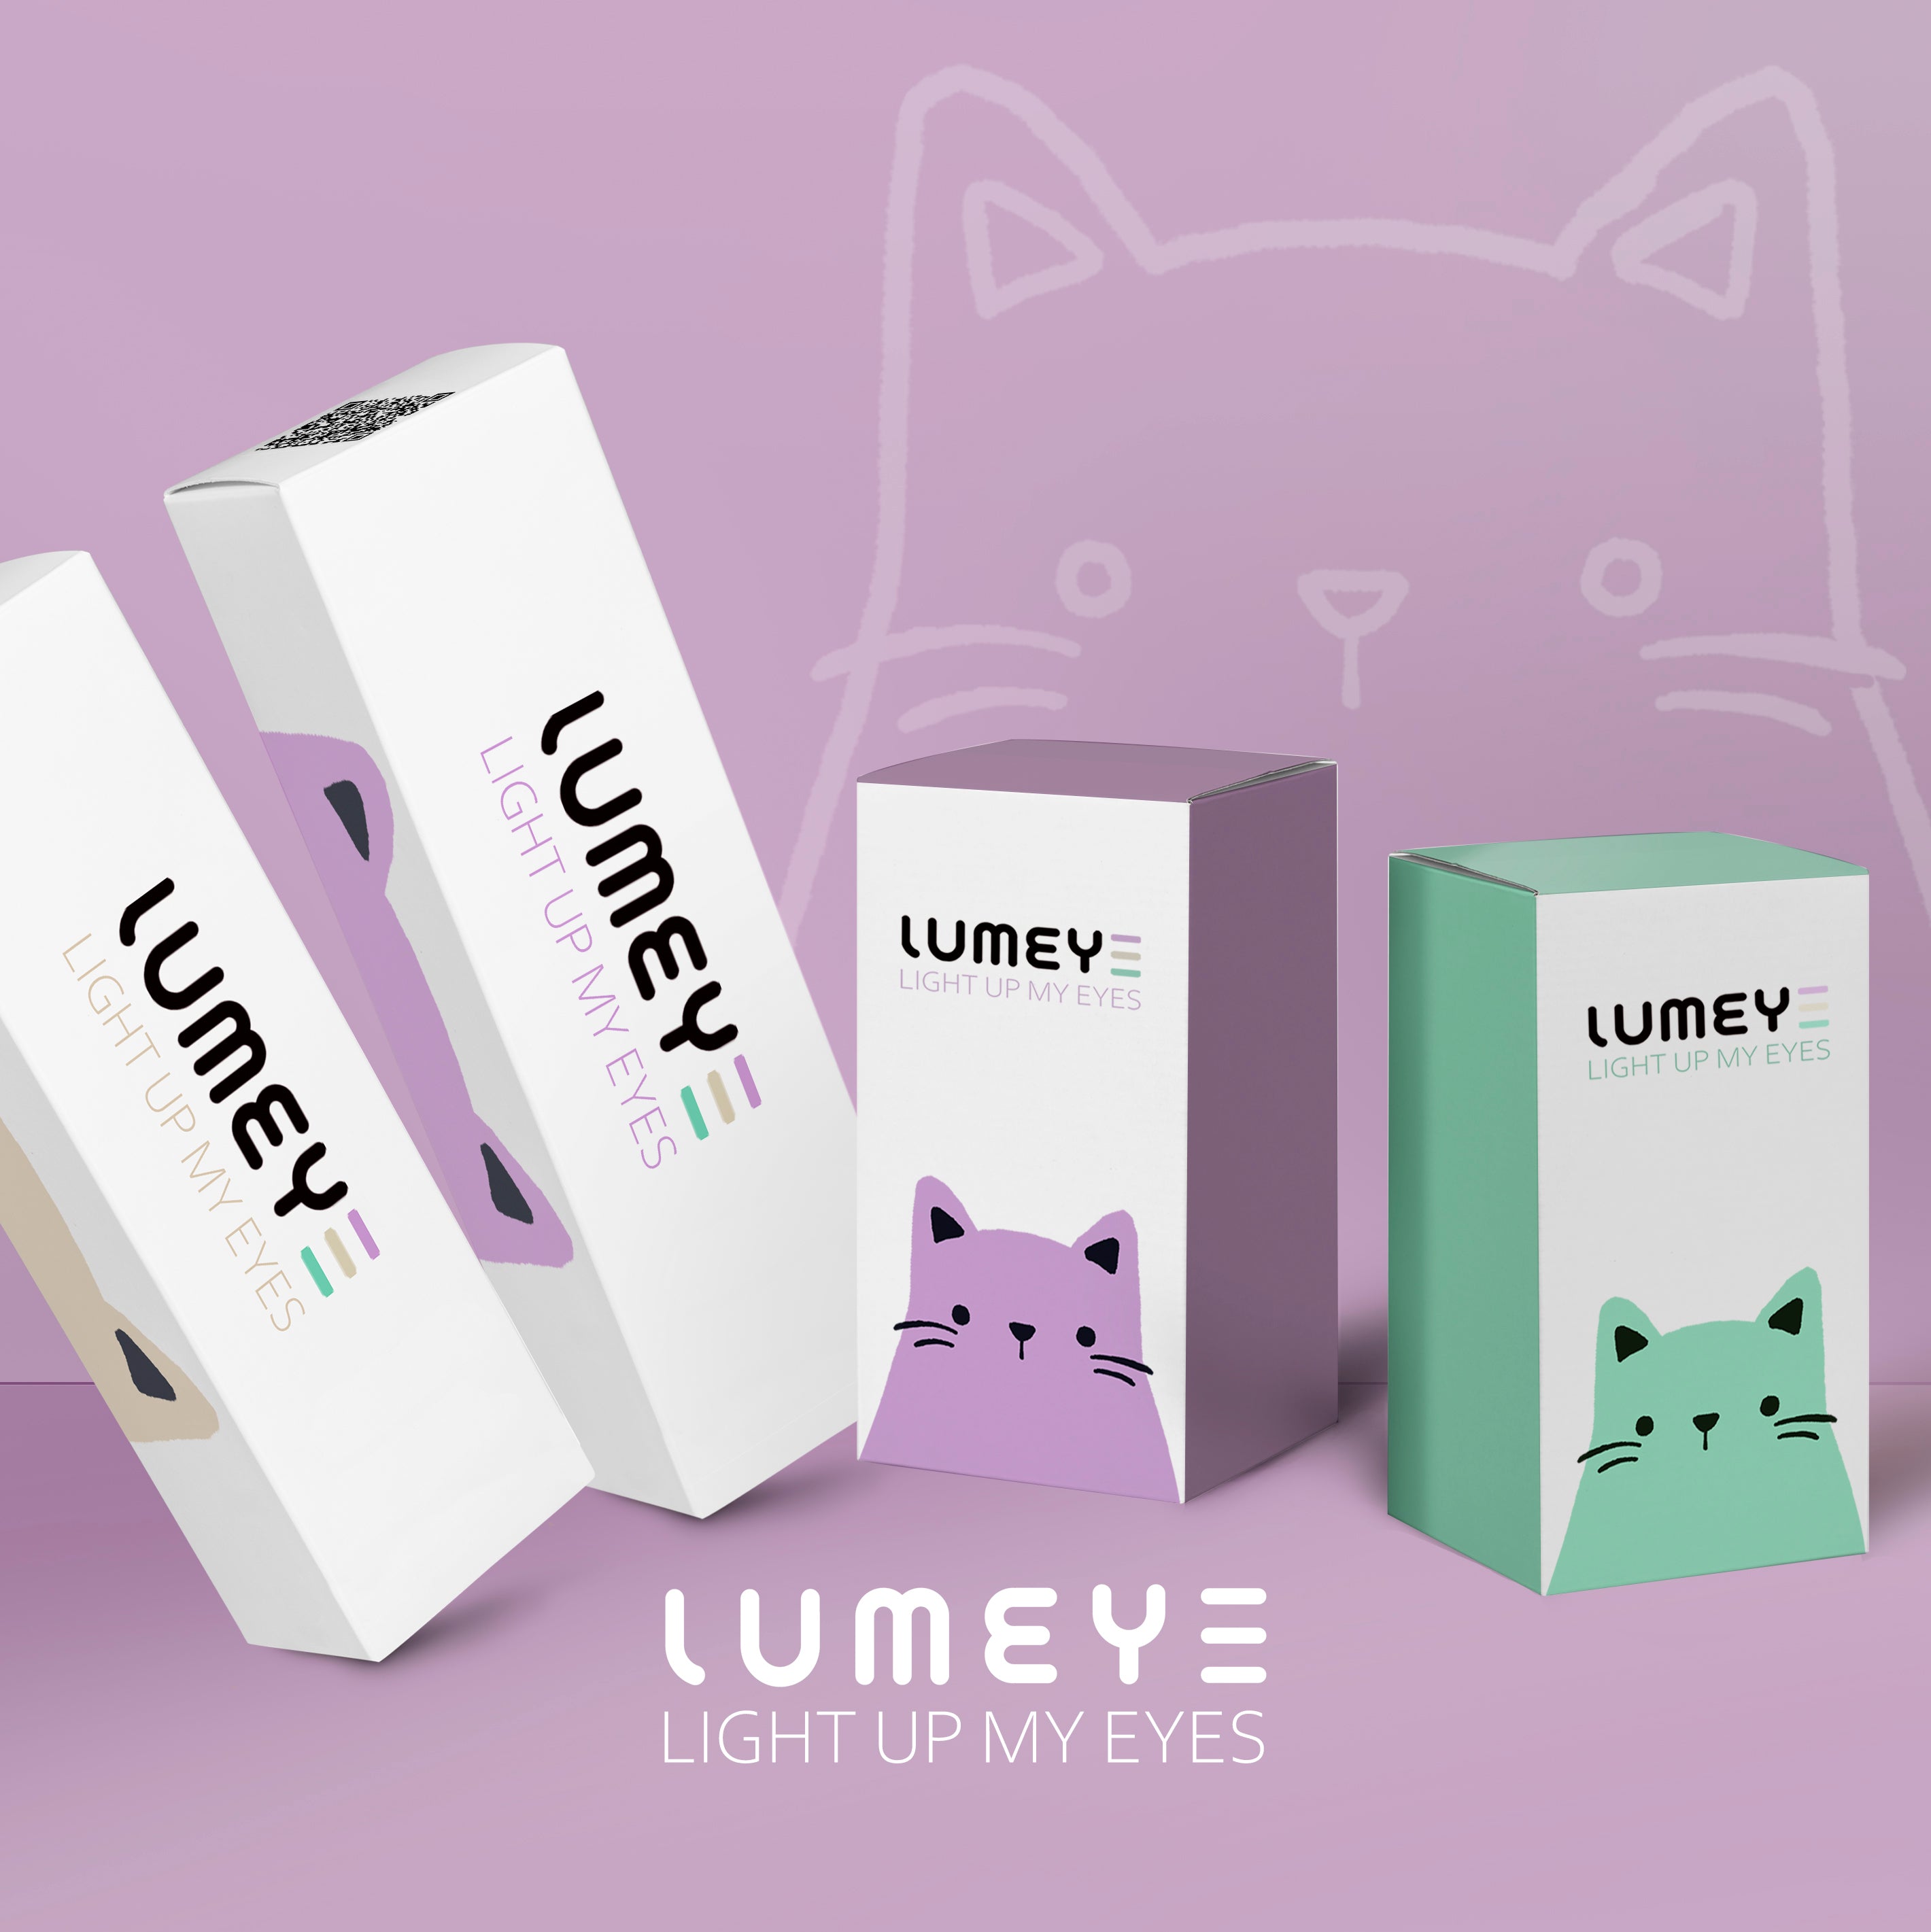 Best COLORED CONTACTS - LUMEYE Whirlwind Black Colored Contact Lenses - LUMEYE